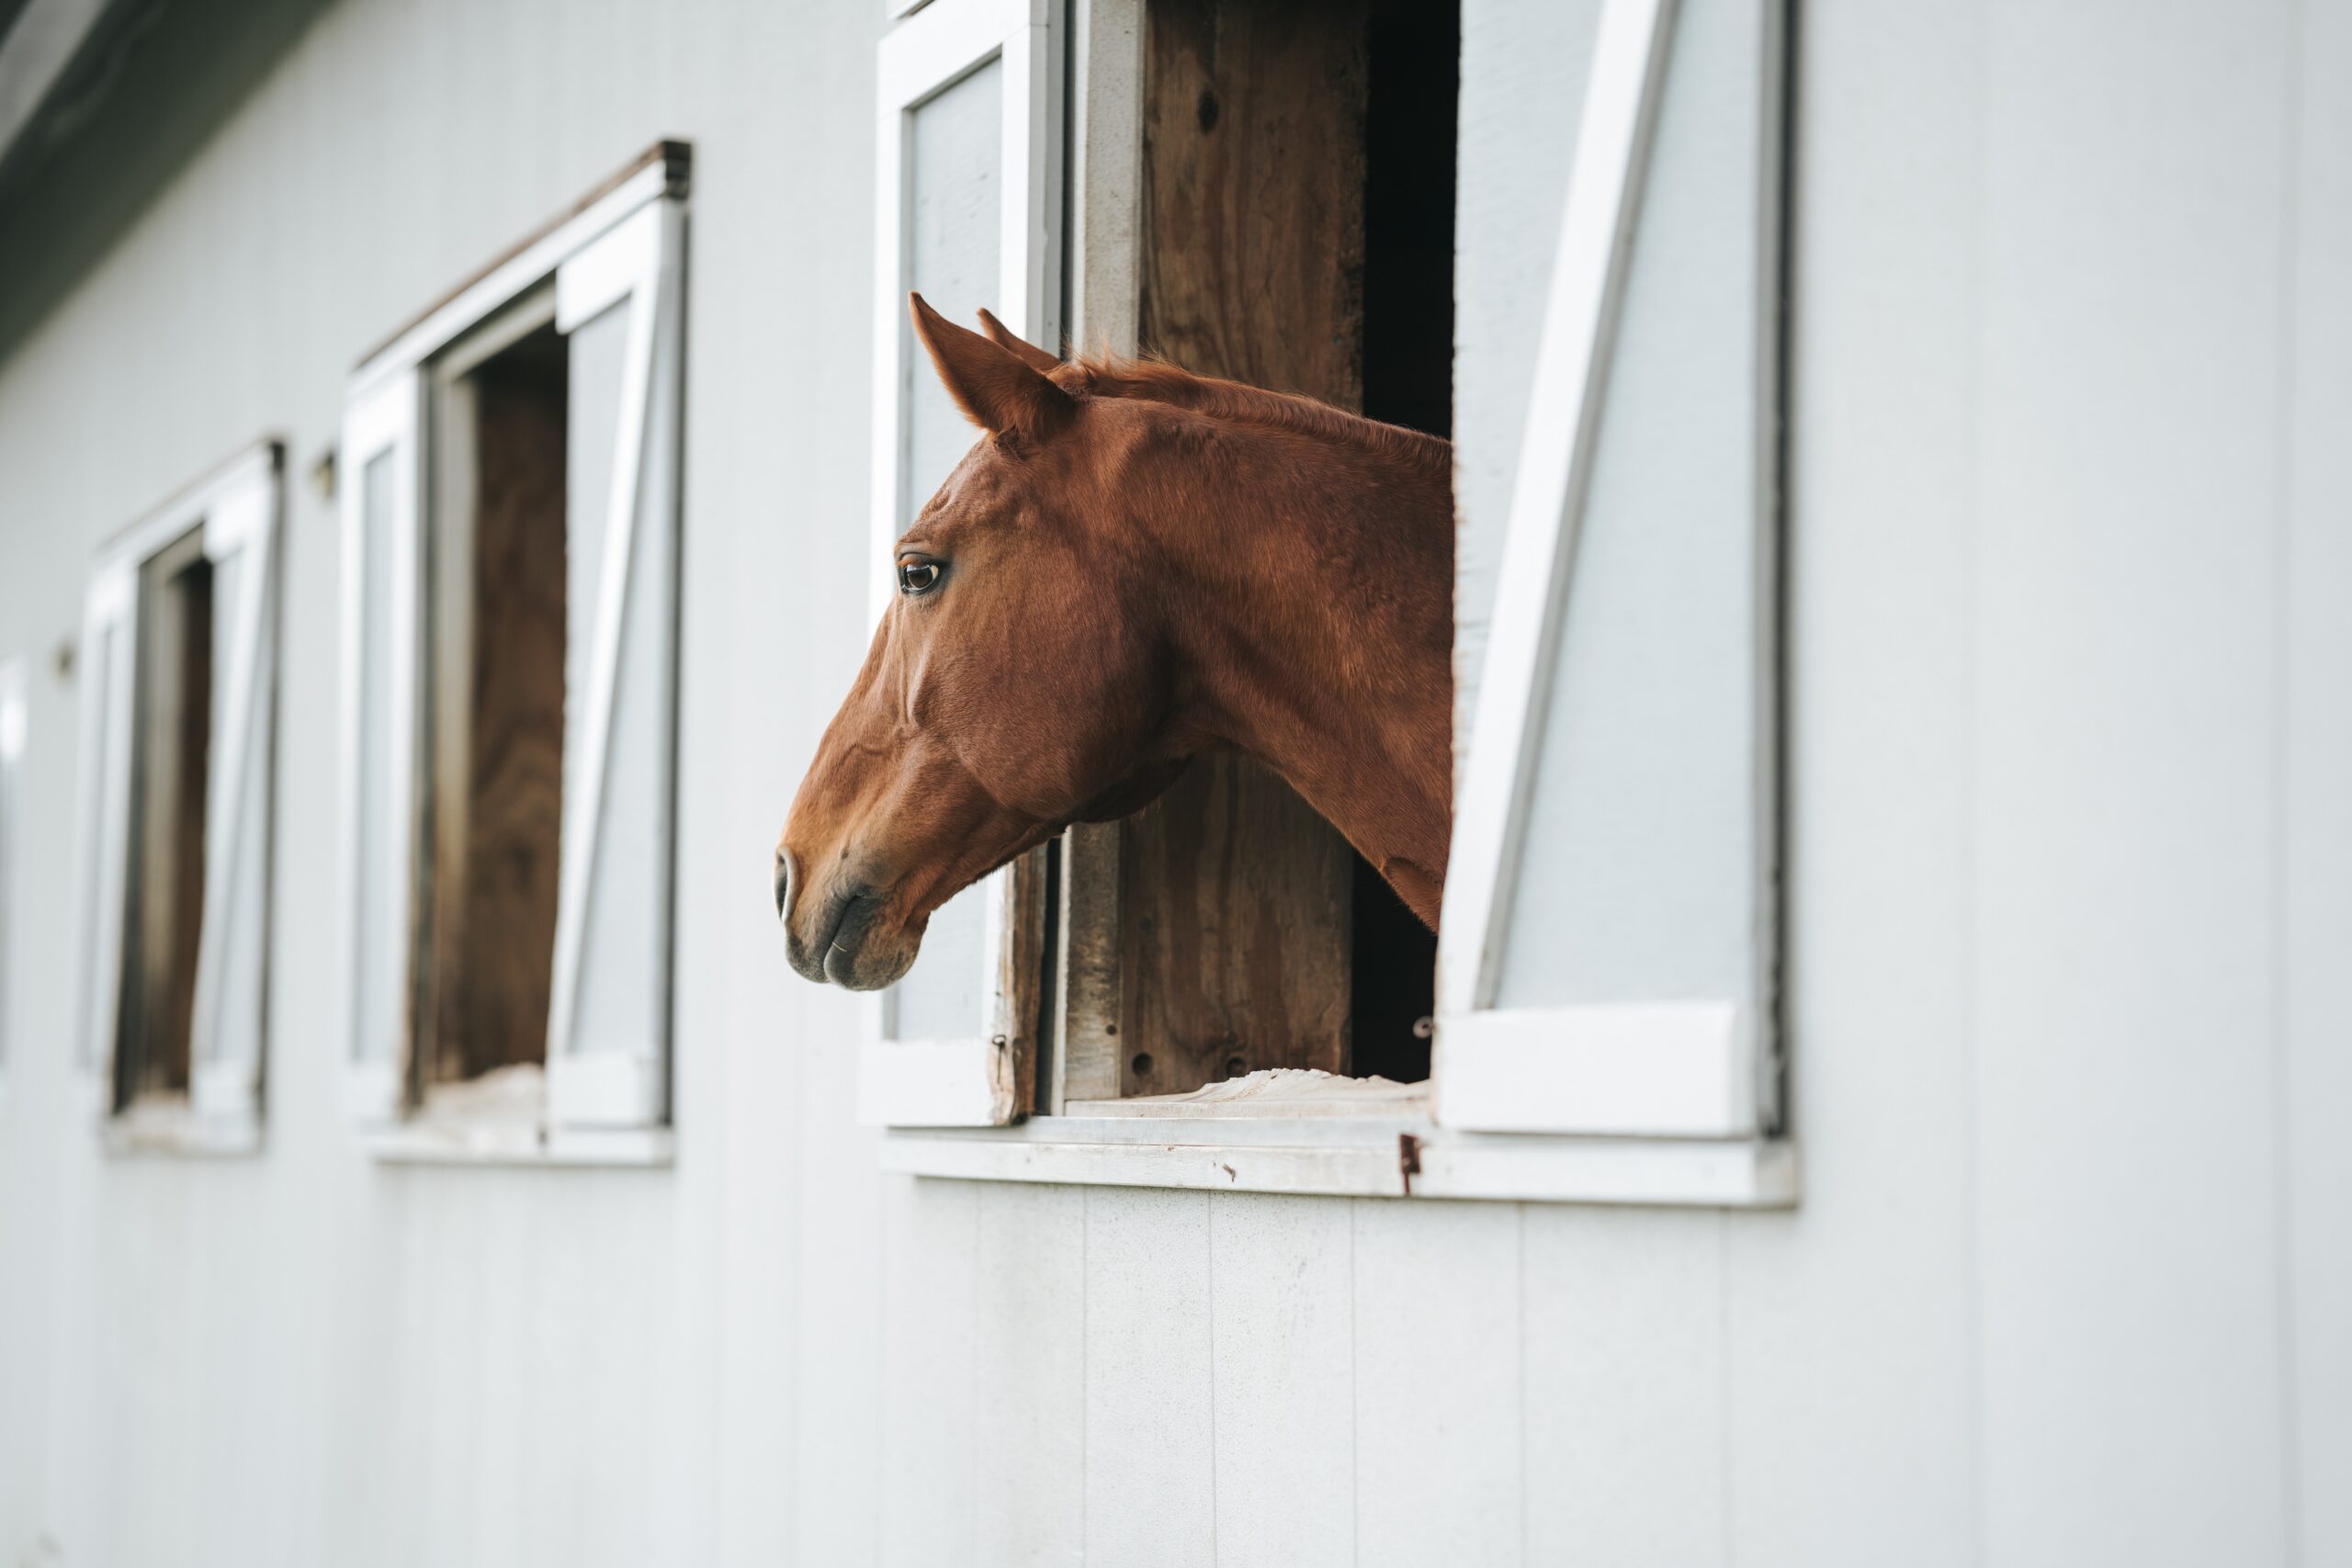 Is Your Horse Protected From Seasonal Flu Outbreaks?